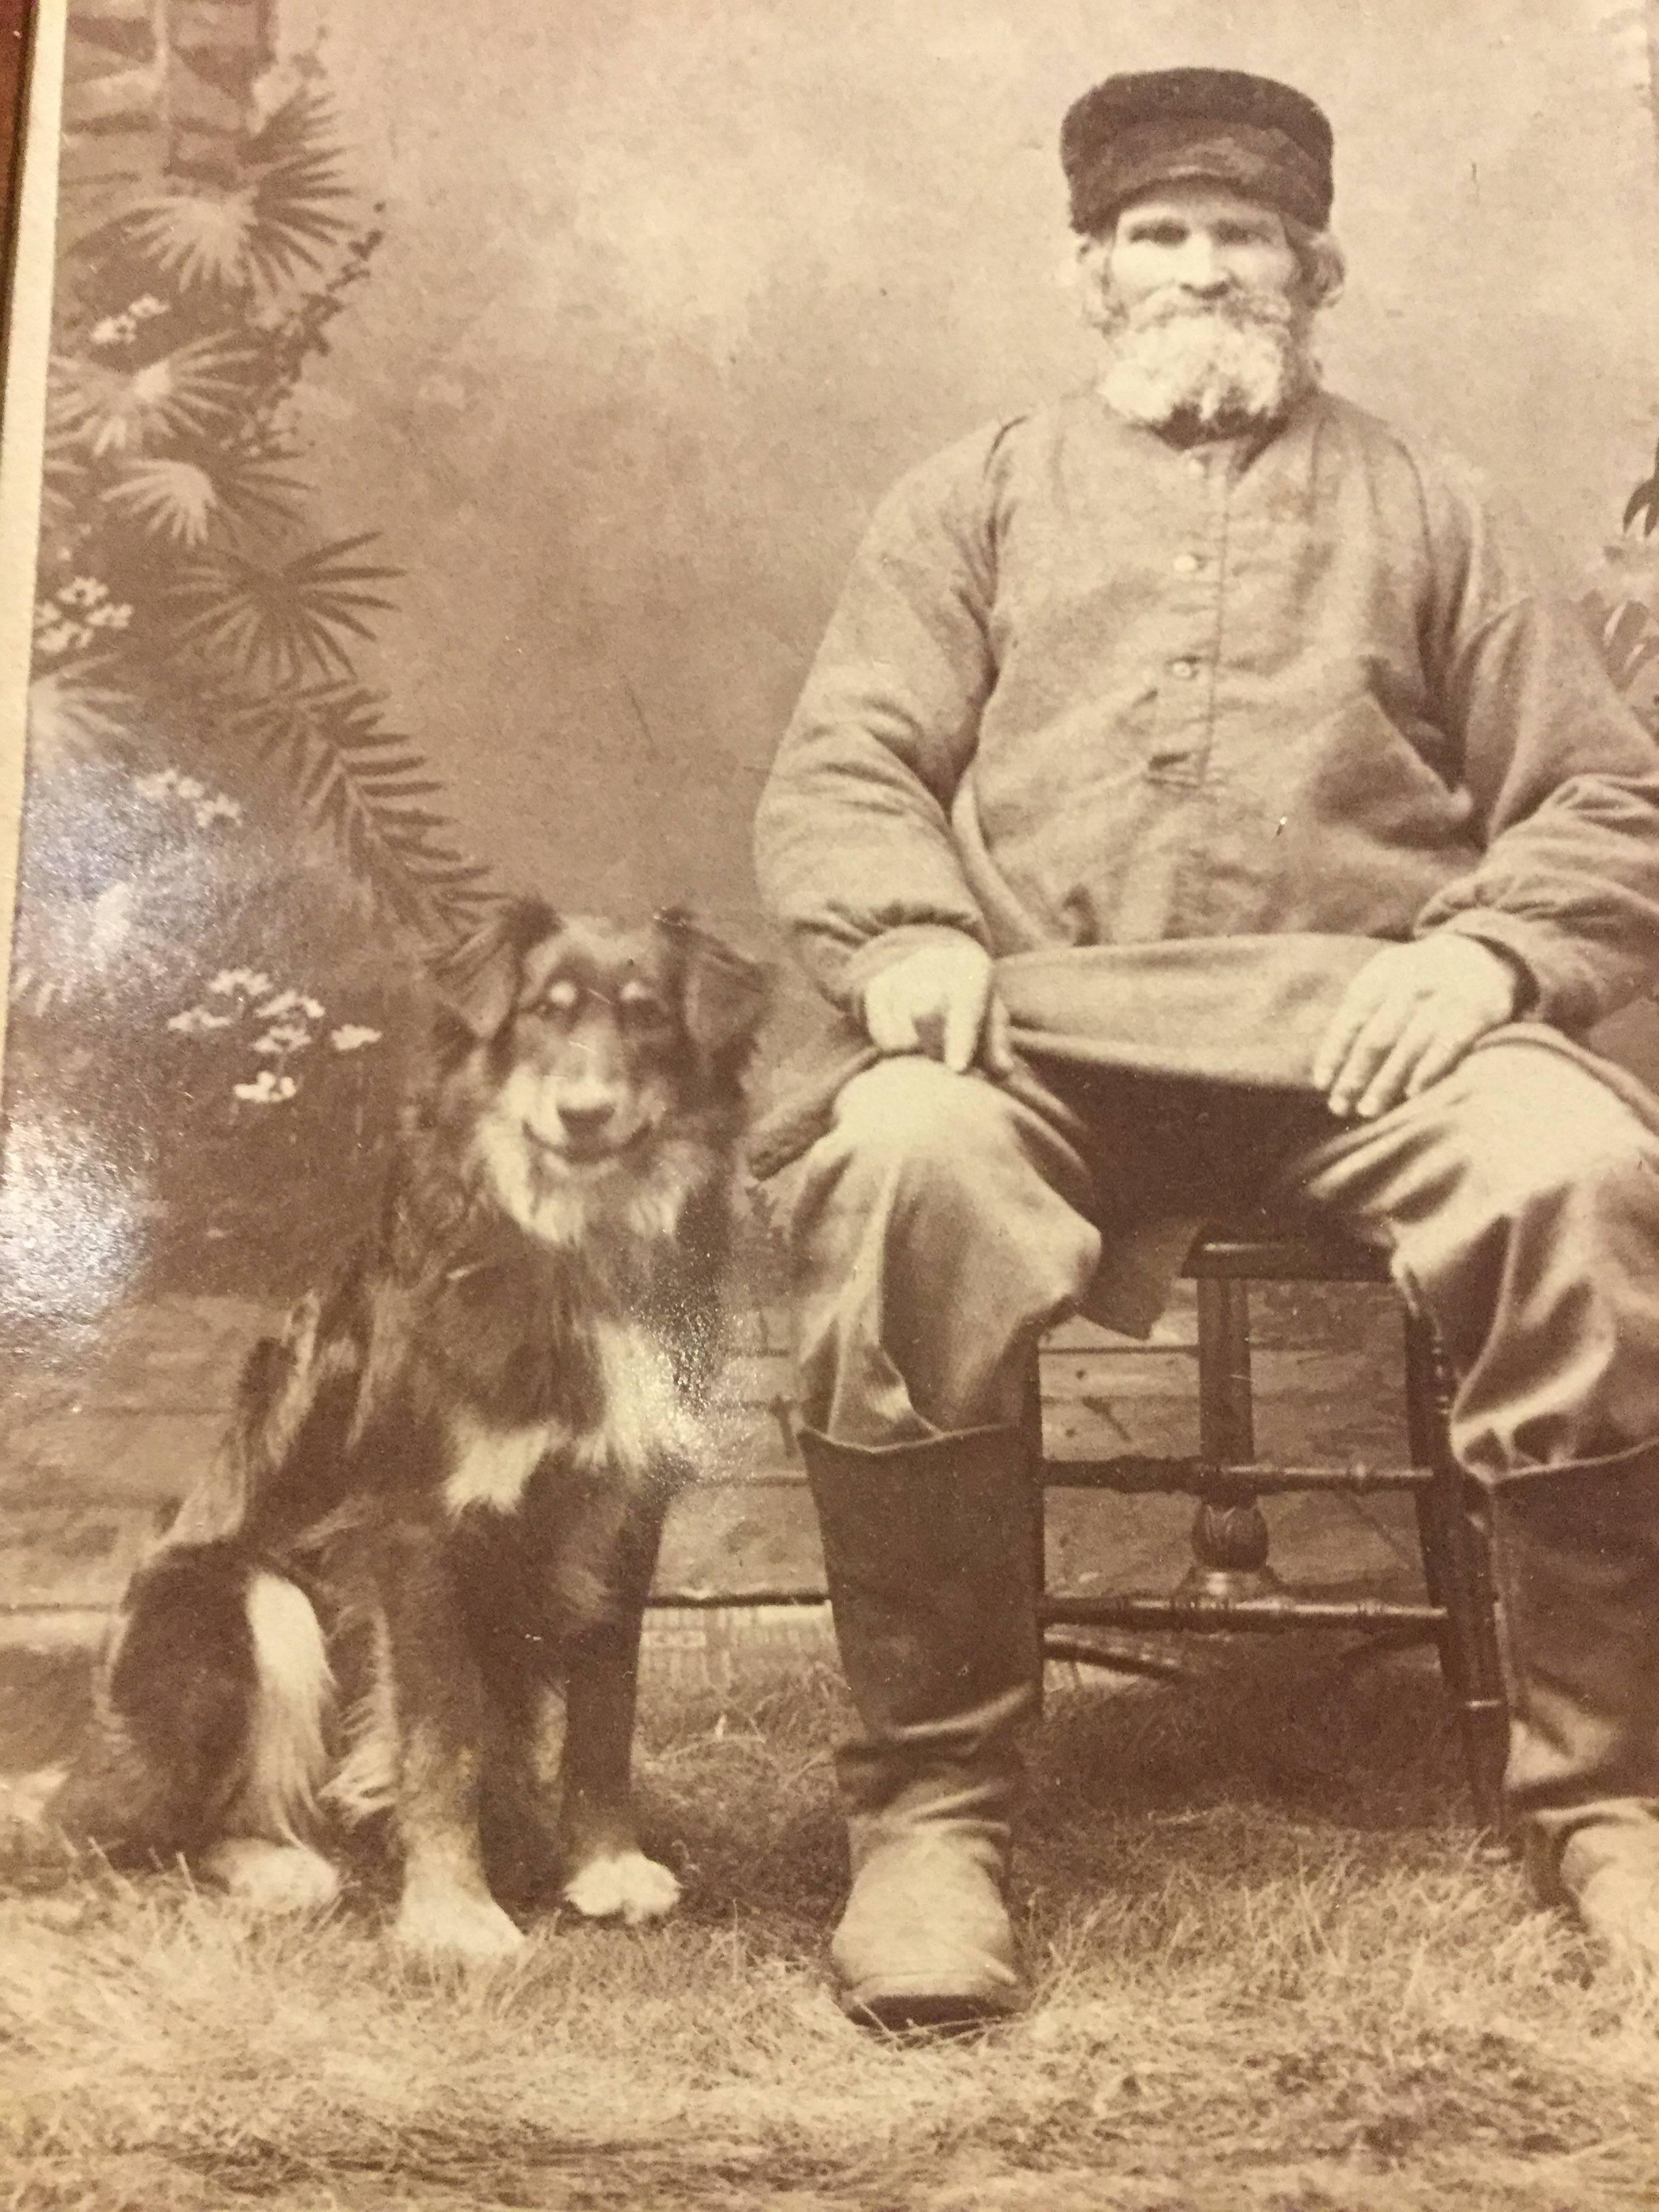 Early Carte de Viste Man and his dog. The man resembles a Russian peasant around 1880 but the photograph was taken in Fitchburg, Ma. Great image!